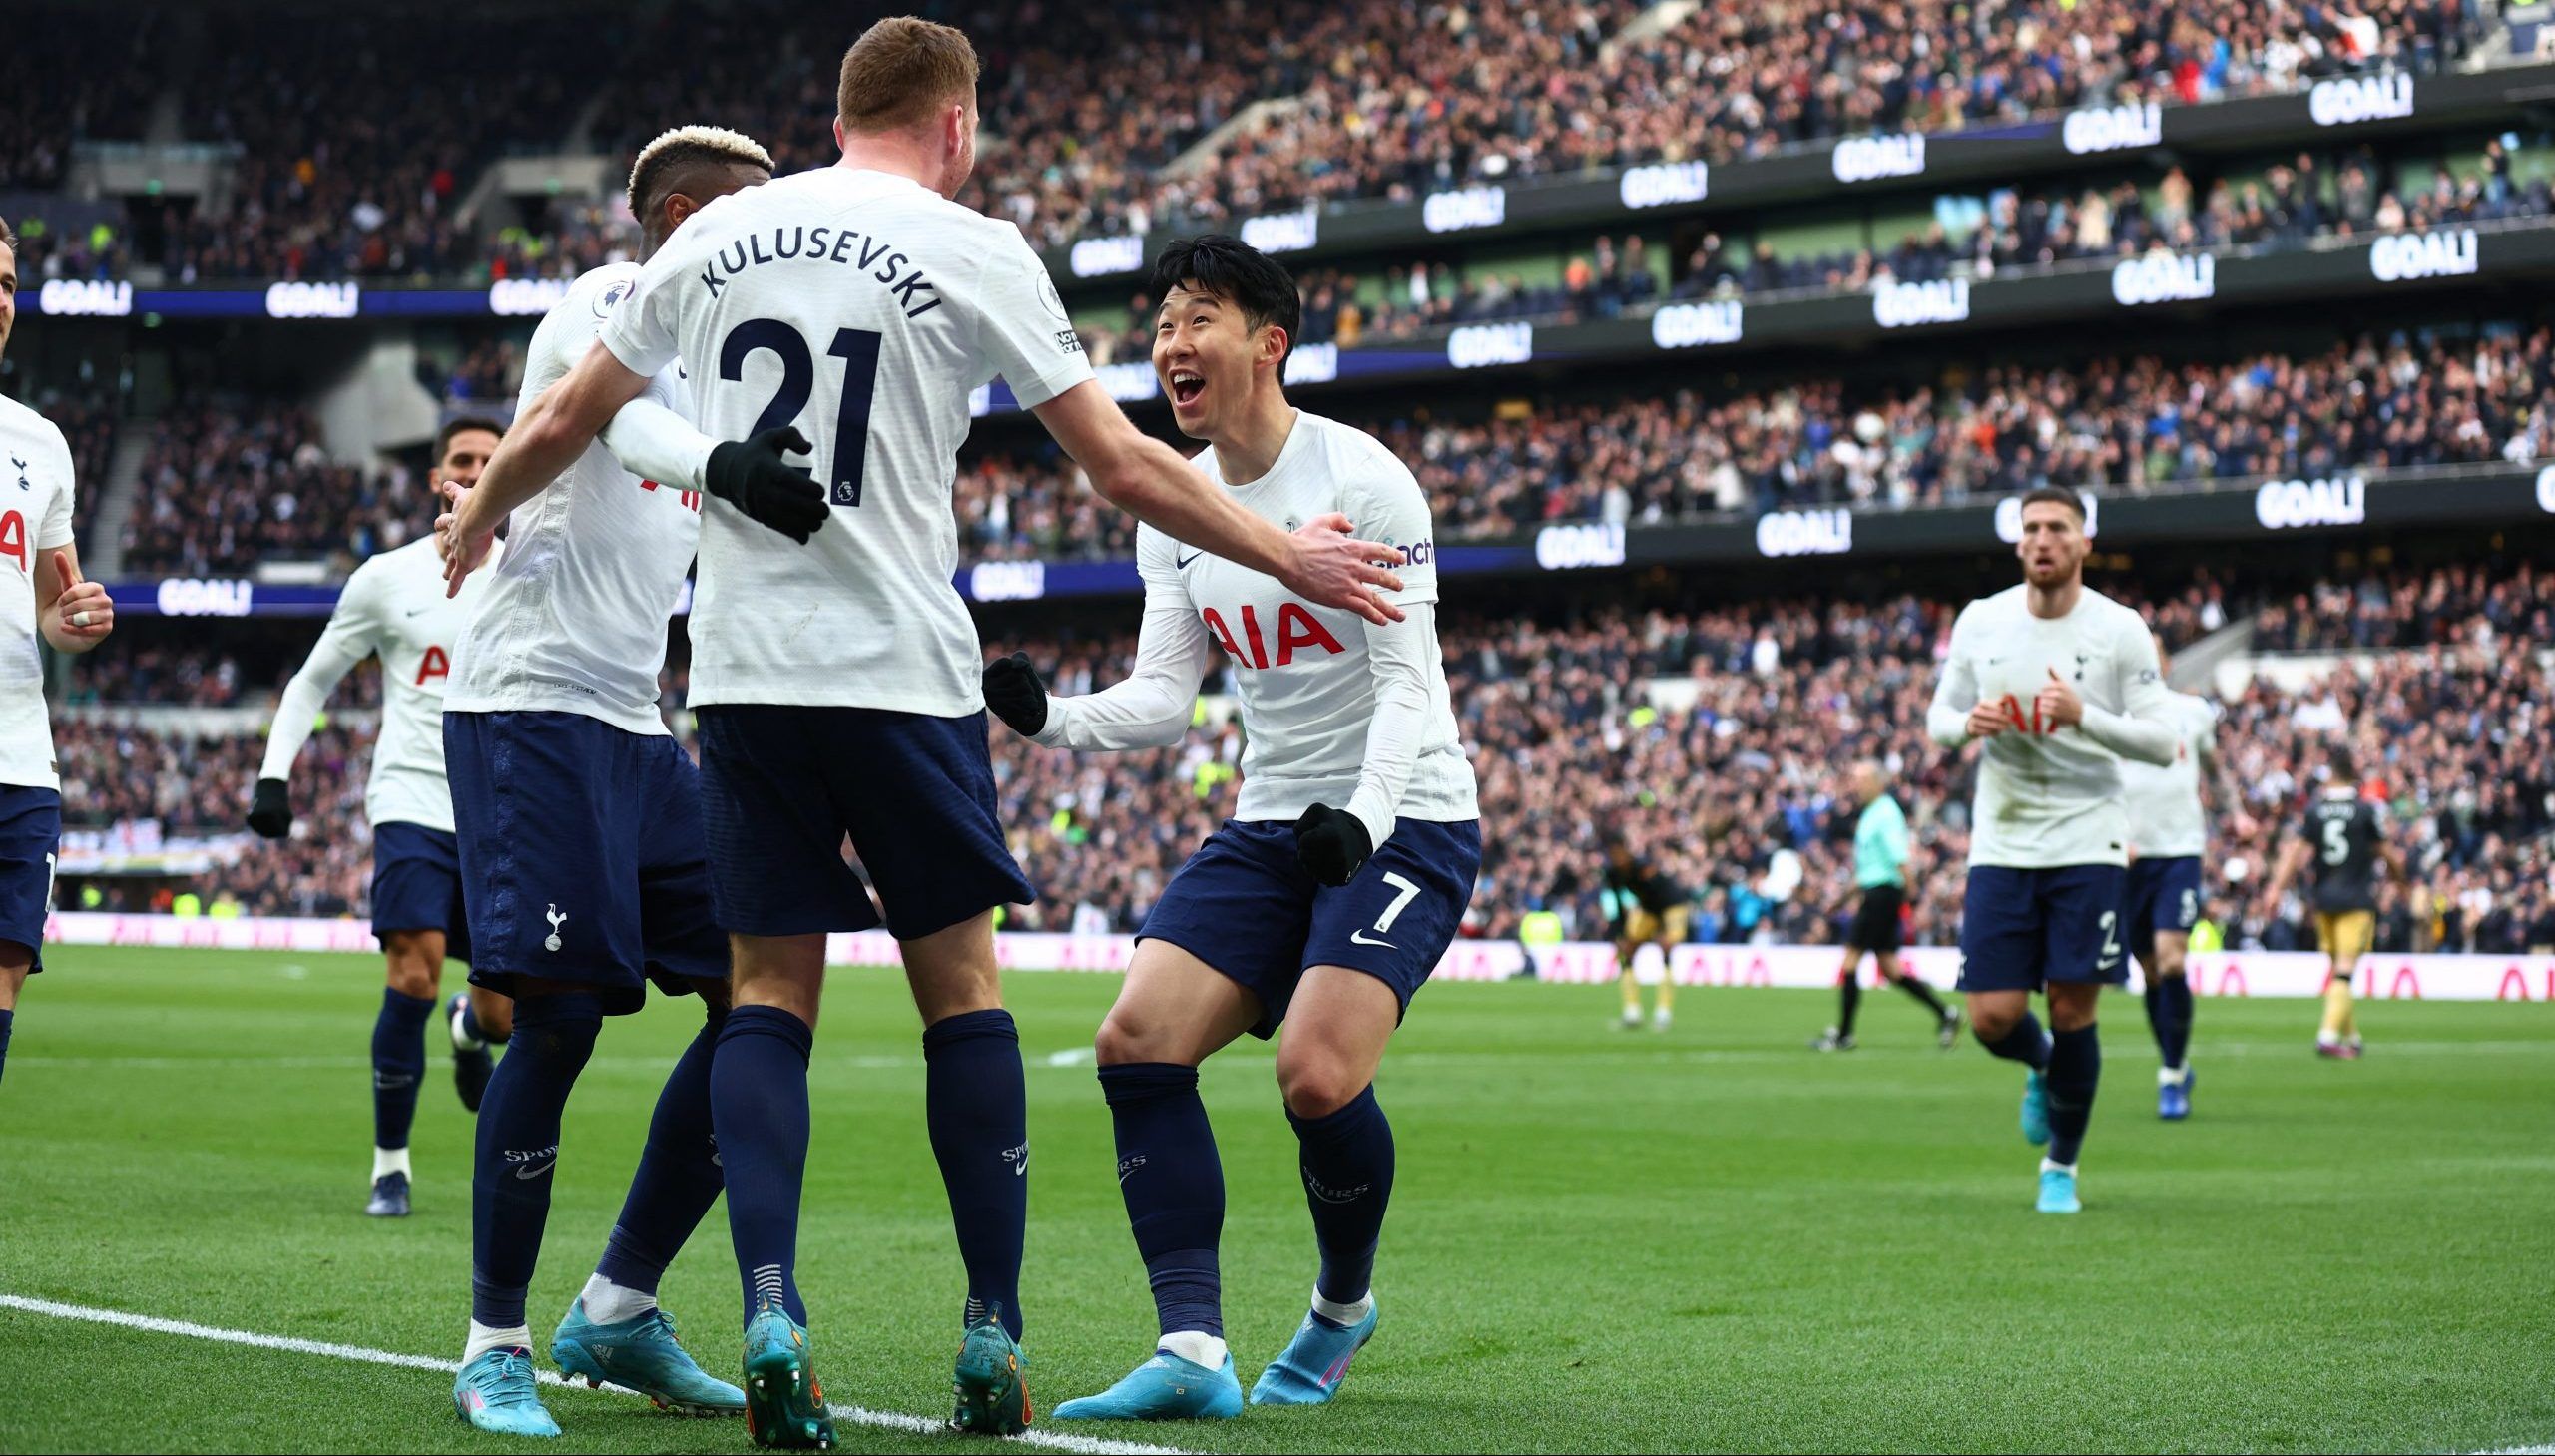 Soccer Football - Premier League - Tottenham Hotspur v Newcastle United - Tottenham Hotspur Stadium, London, Britain - April 3, 2022 Tottenham Hotspur's Son Heung-min celebrates scoring their third goal with teammates REUTERS/David Klein EDITORIAL USE ONLY. No use with unauthorized audio, video, data, fixture lists, club/league logos or 'live' services. Online in-match use limited to 75 images, no video emulation. No use in betting, games or single club /league/player publications.  Please conta